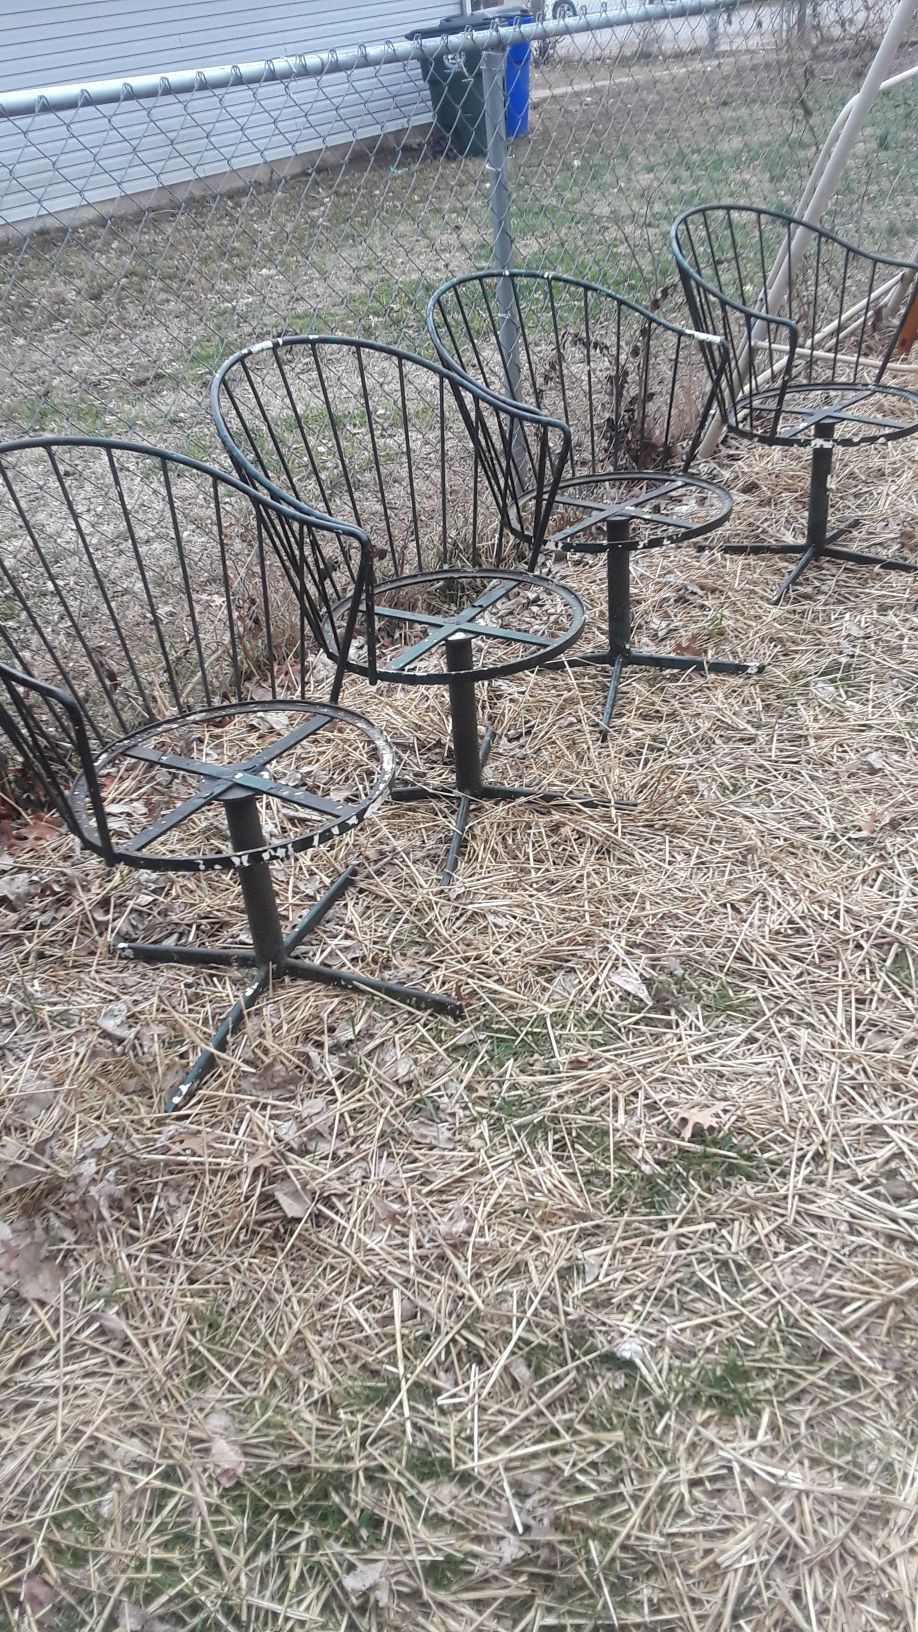 4 of them Rod Iron chairs